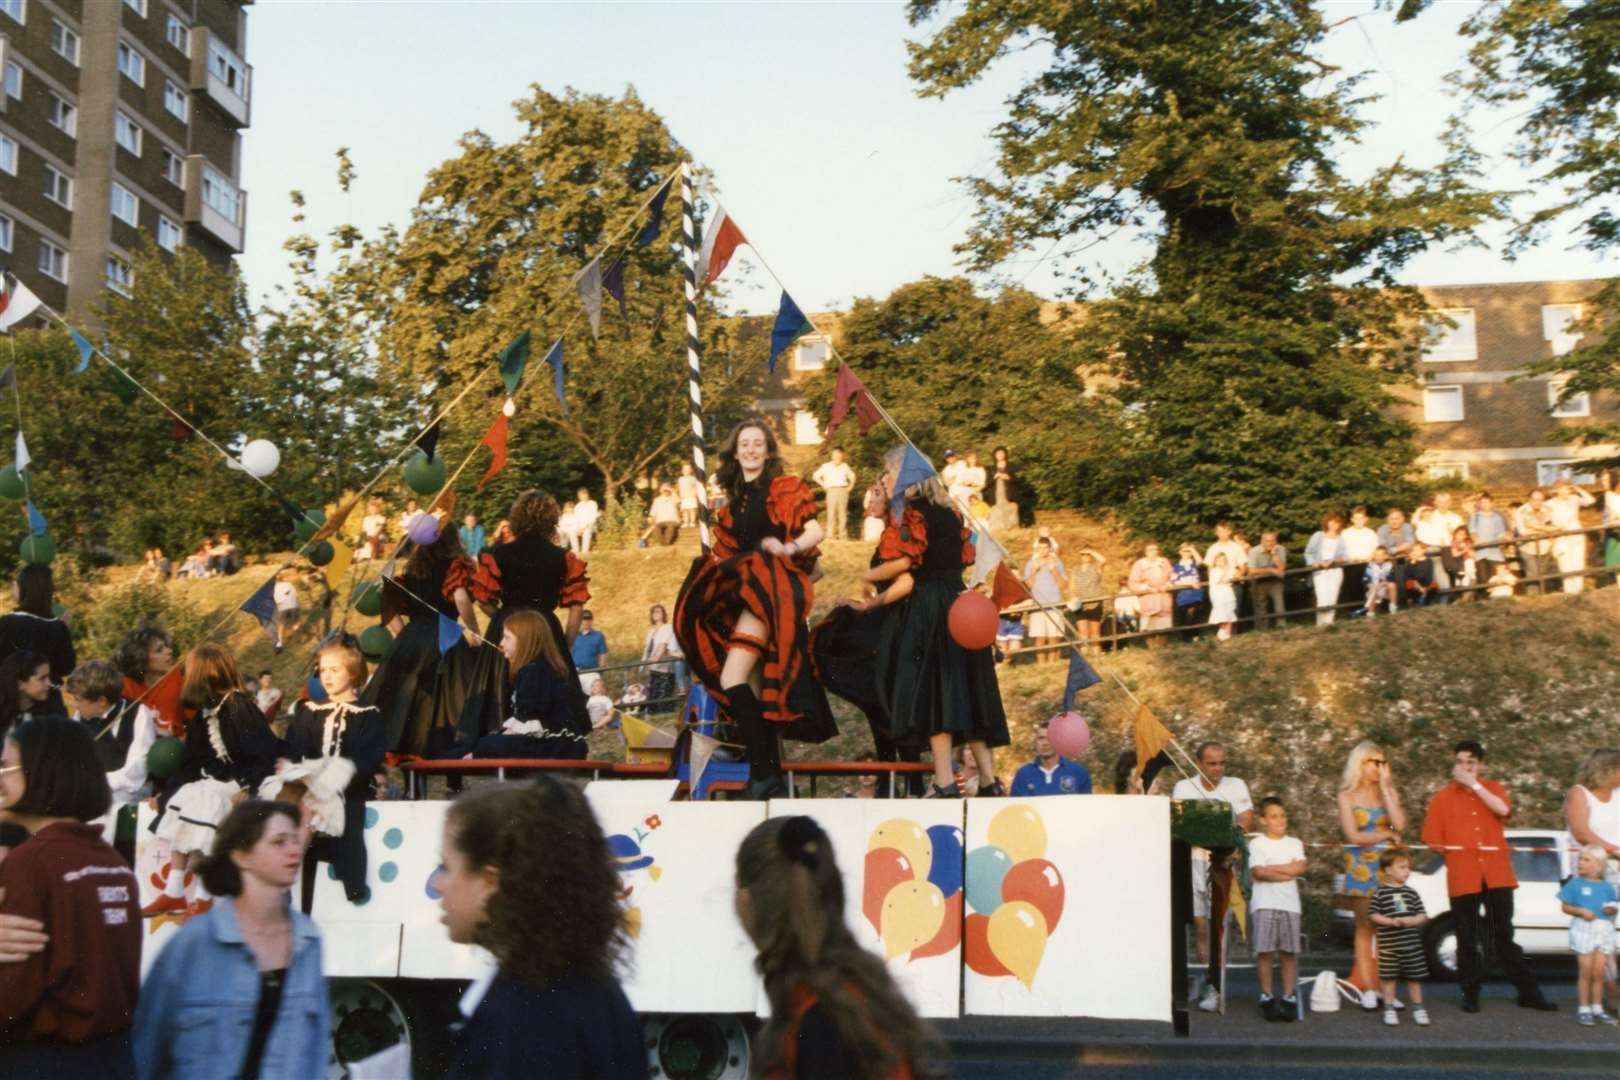 Rochester Theatre Arts School taking part in Medway Carnival during the late 90s